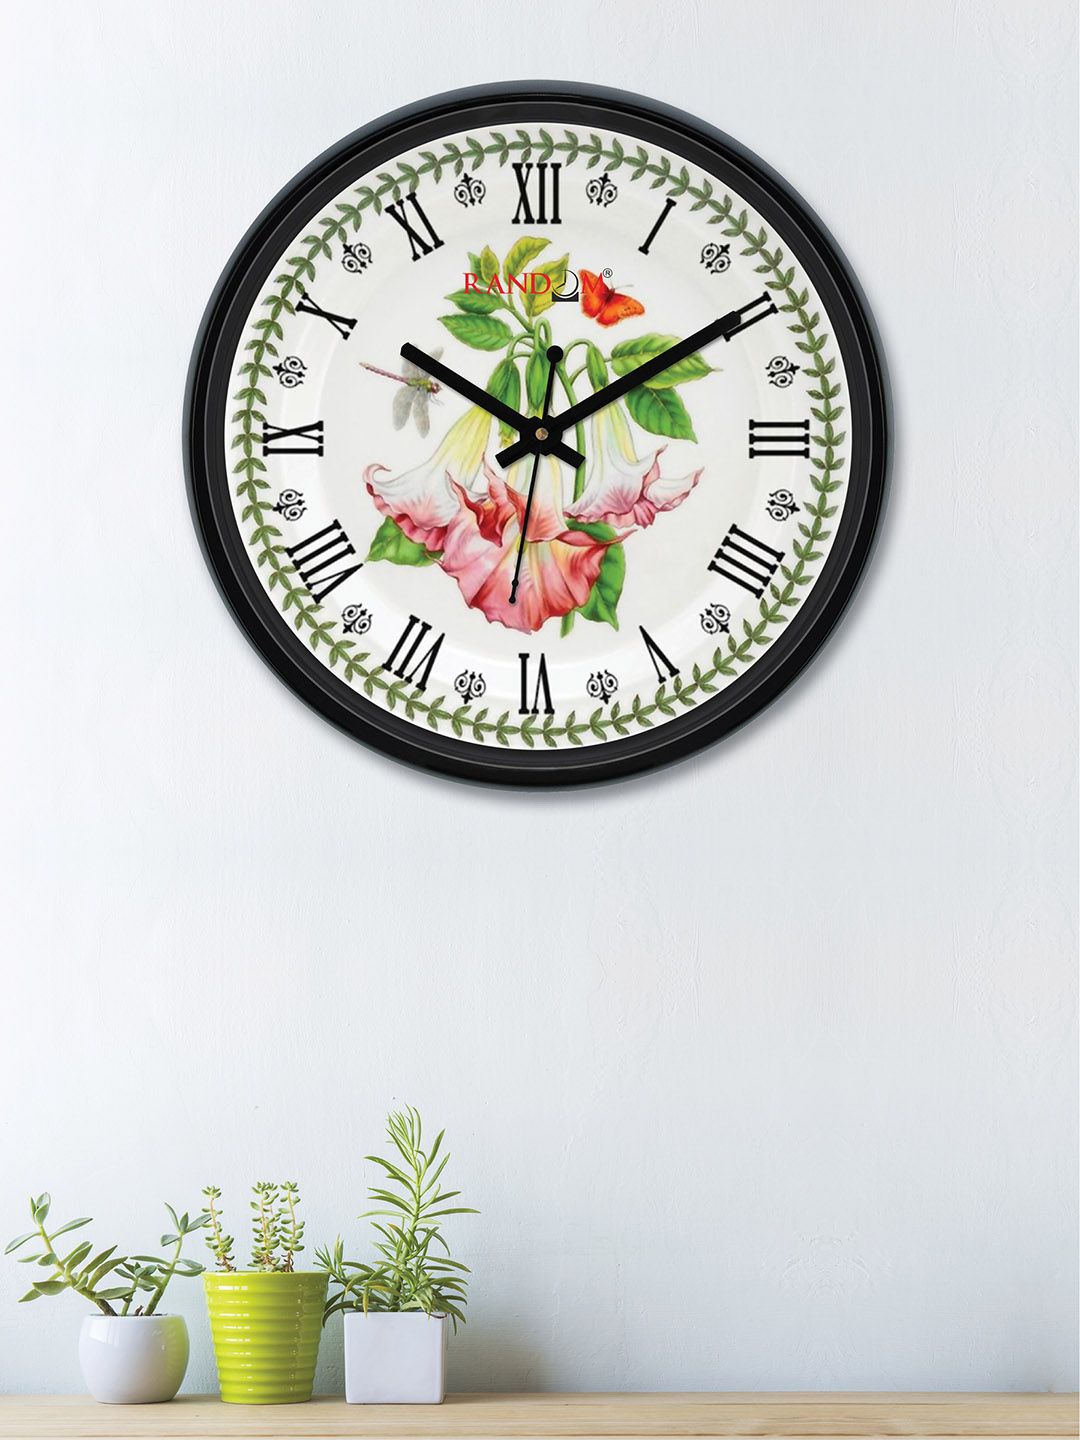 RANDOM Off-White & Green Round Printed 30 cm Analogue Wall Clock Price in India